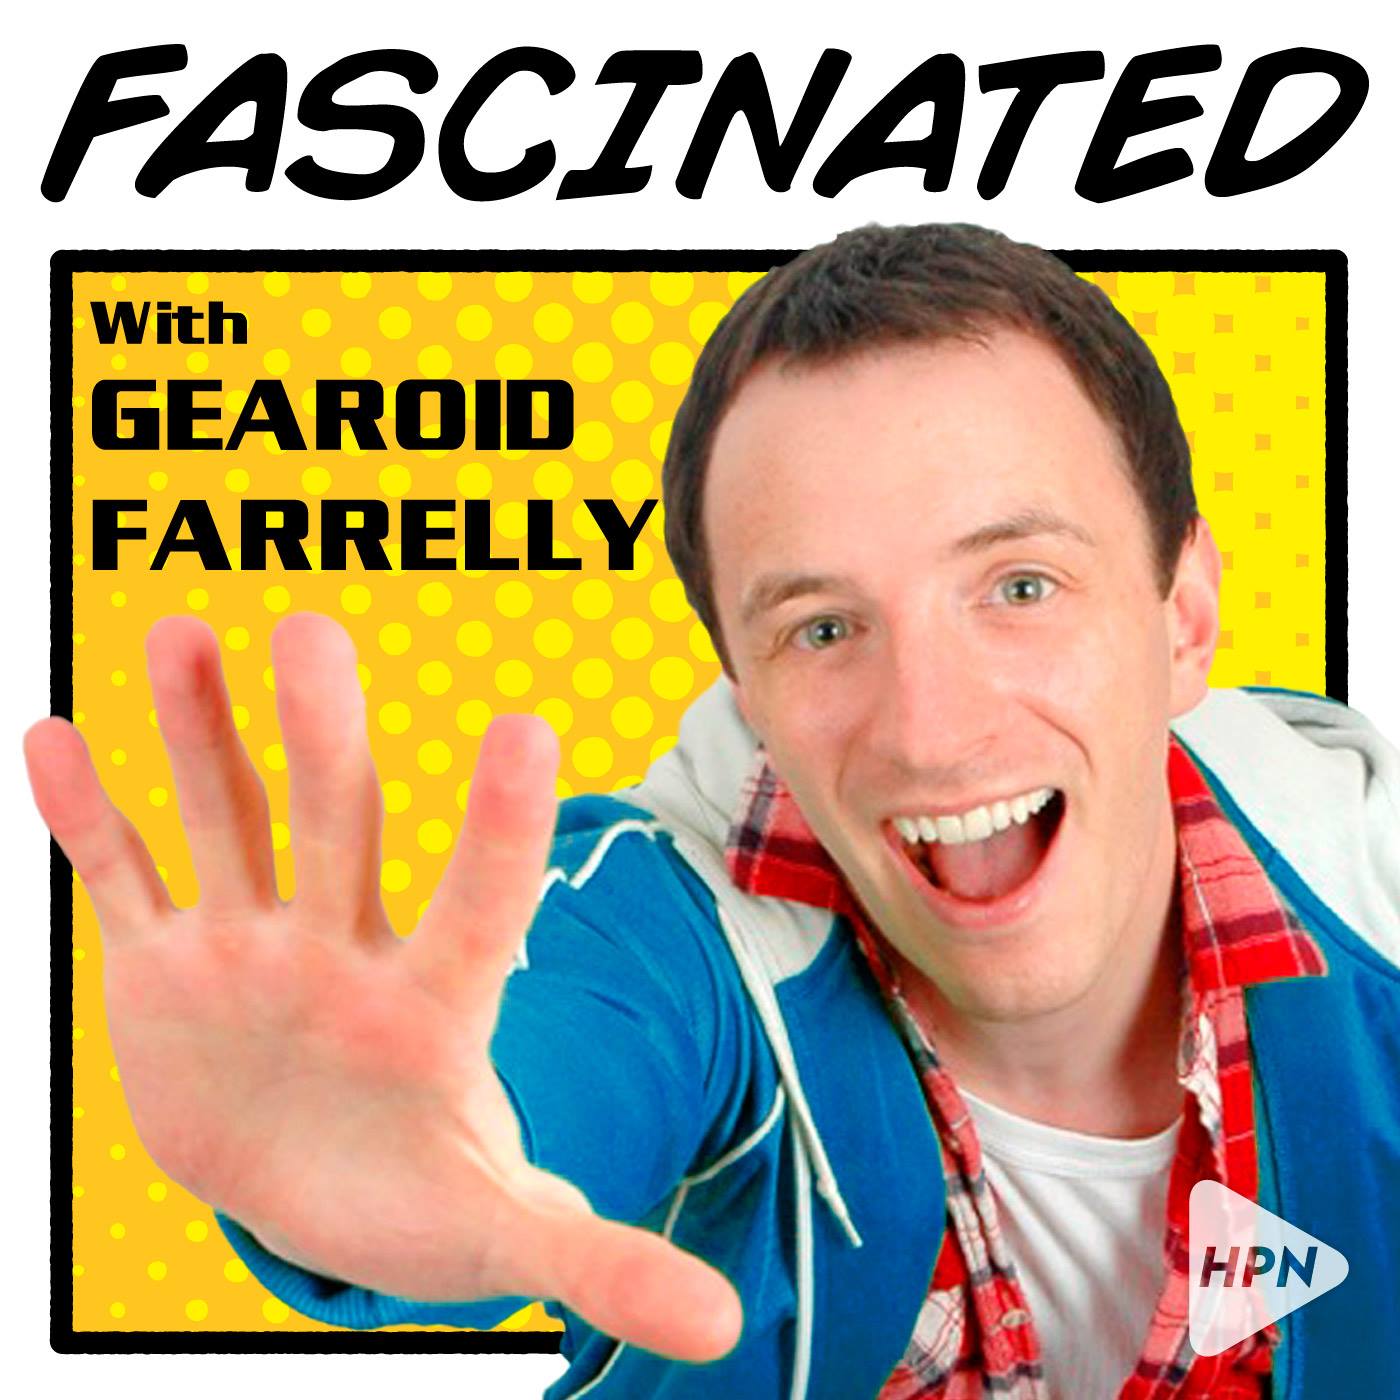 Fascinated podcast with Gearoid Farrelly, HPN, comedy, culture, interviews - HeadStuff.org